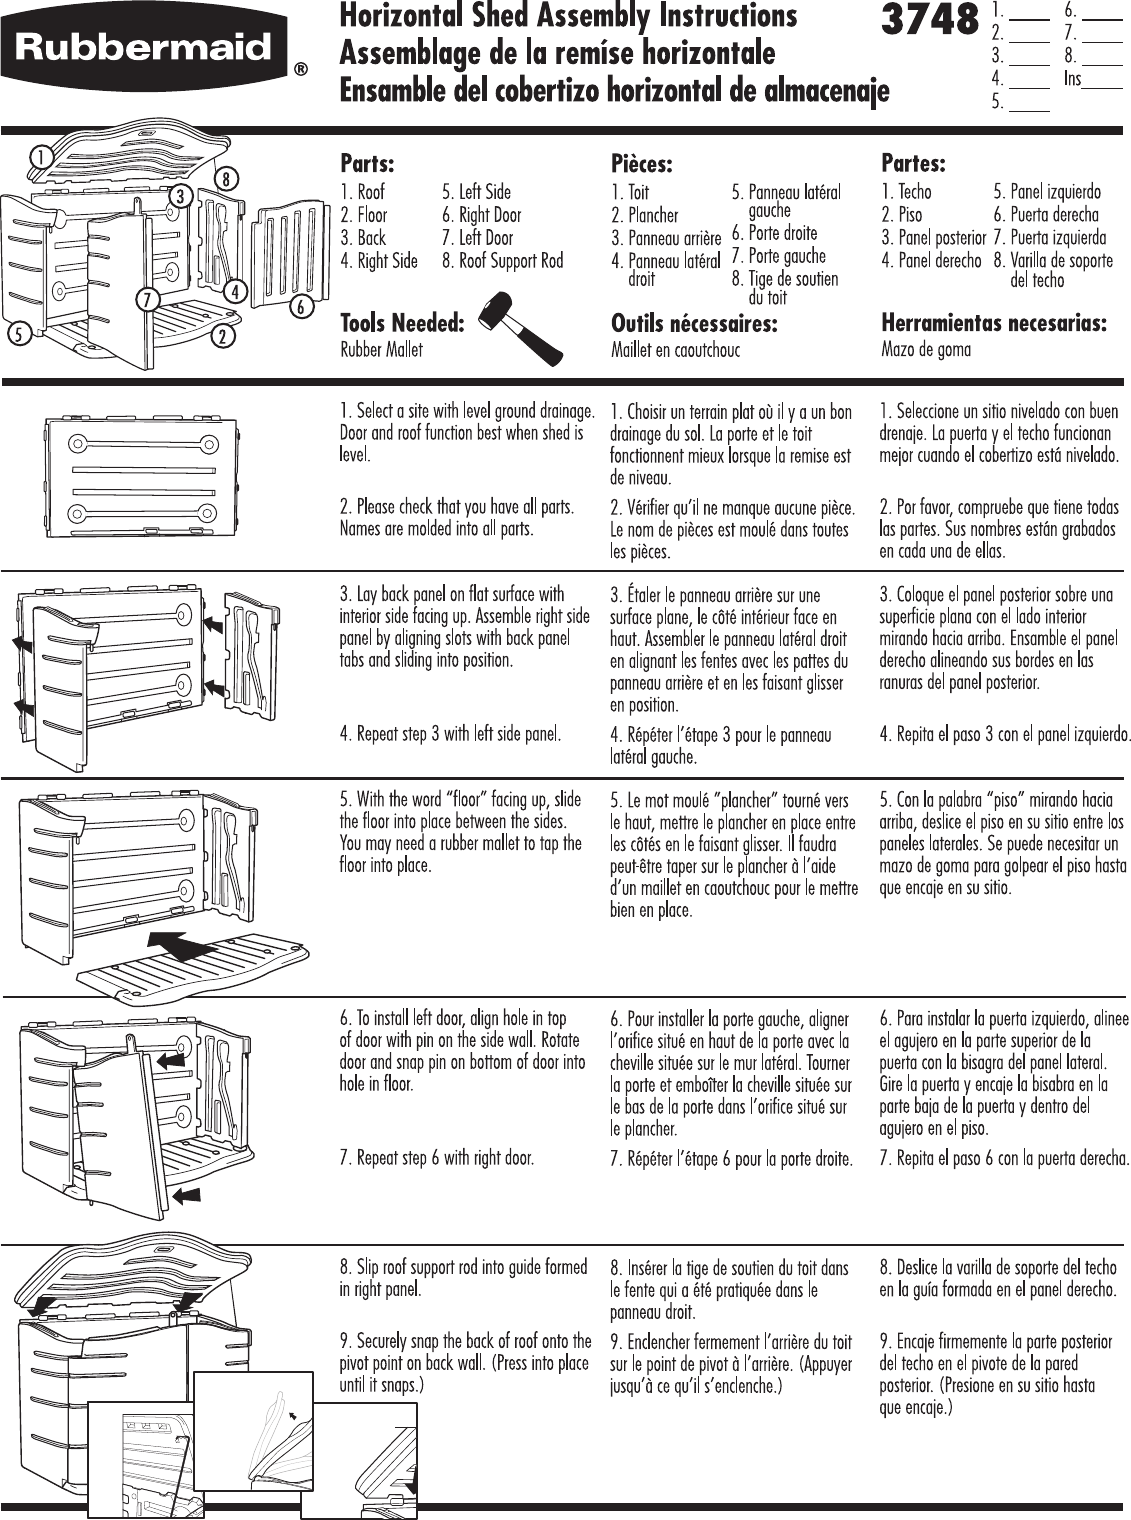 Page 1 of 2 - Rubbermaid Rubbermaid-Outdoor-Storage-3746-Users-Manual- Horizontal Shed 3748 Assembly Instructions  Rubbermaid-outdoor-storage-3746-users-manual